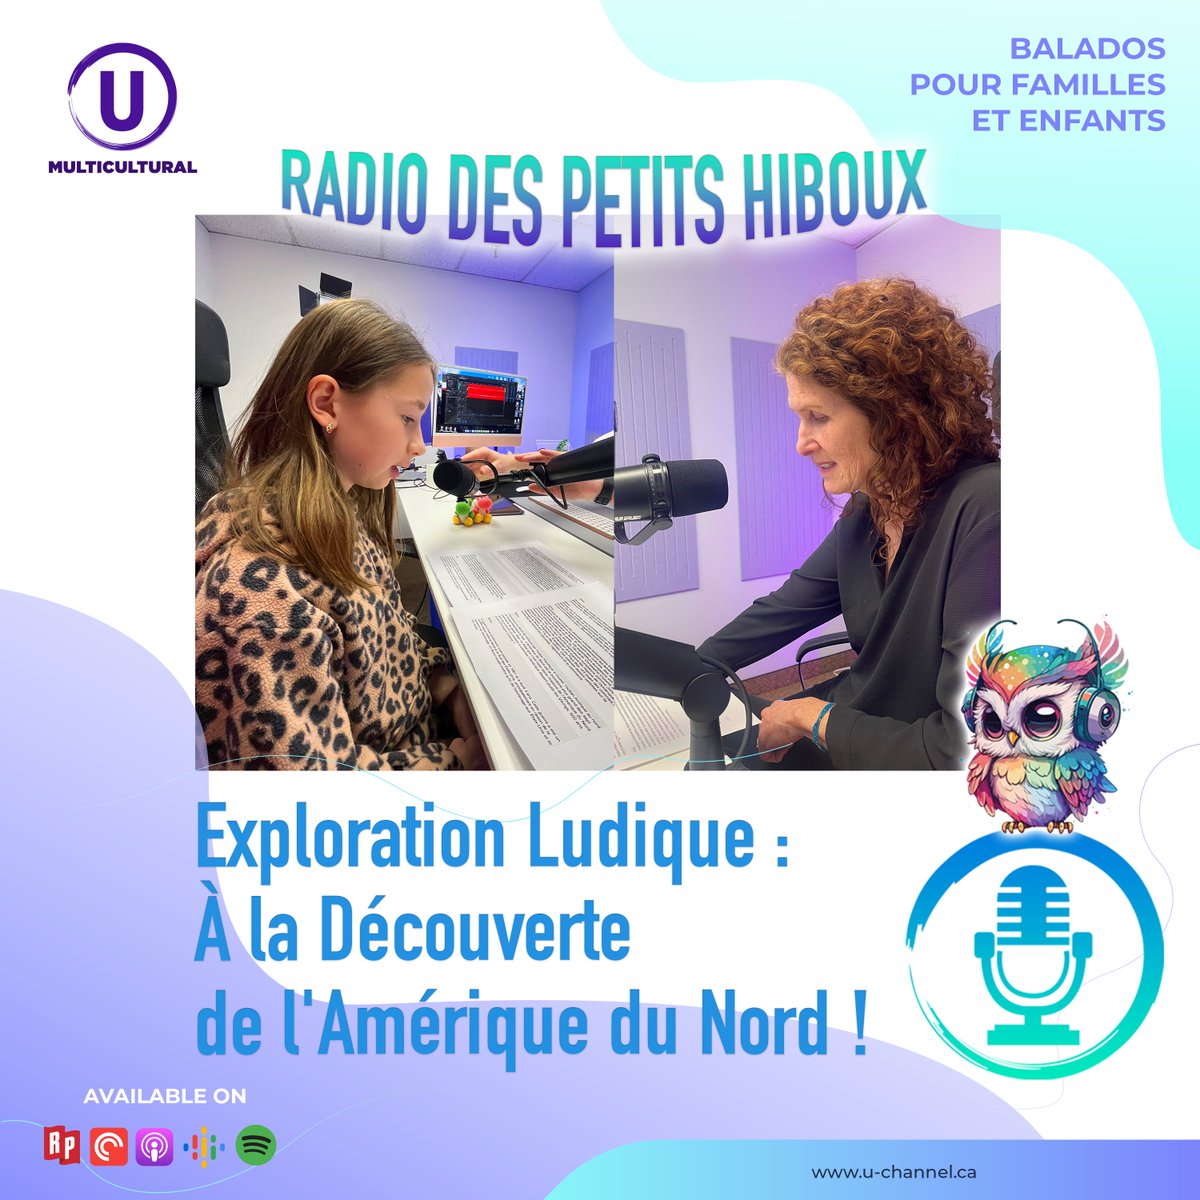 North America is a boundless and beautiful land full of rich biomes and diverse peoples. There's so much to explore. Alisa and Dawna Hales-Massé discover the wonders of l'Amérique du Nord on Radio des Petit Hiboux. 🎧Learn with us on U Radio! u-channel.ca/u-radio/